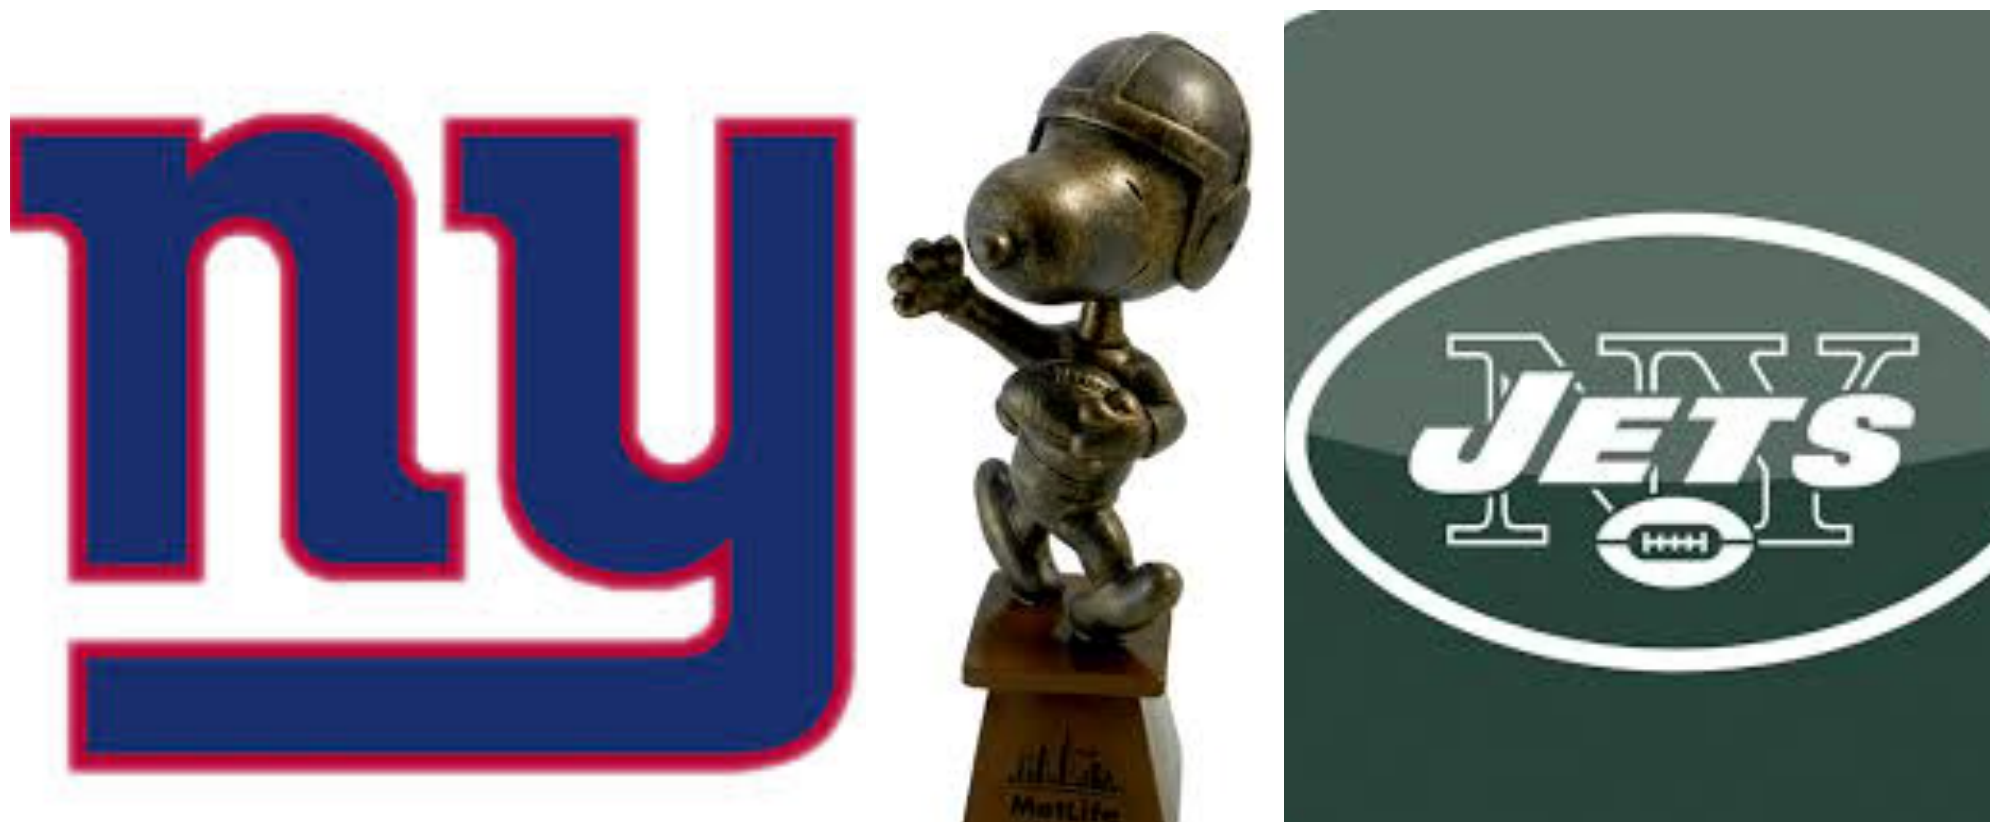 The annual Snoopy Bowl between the New York Giants & The New York Jets